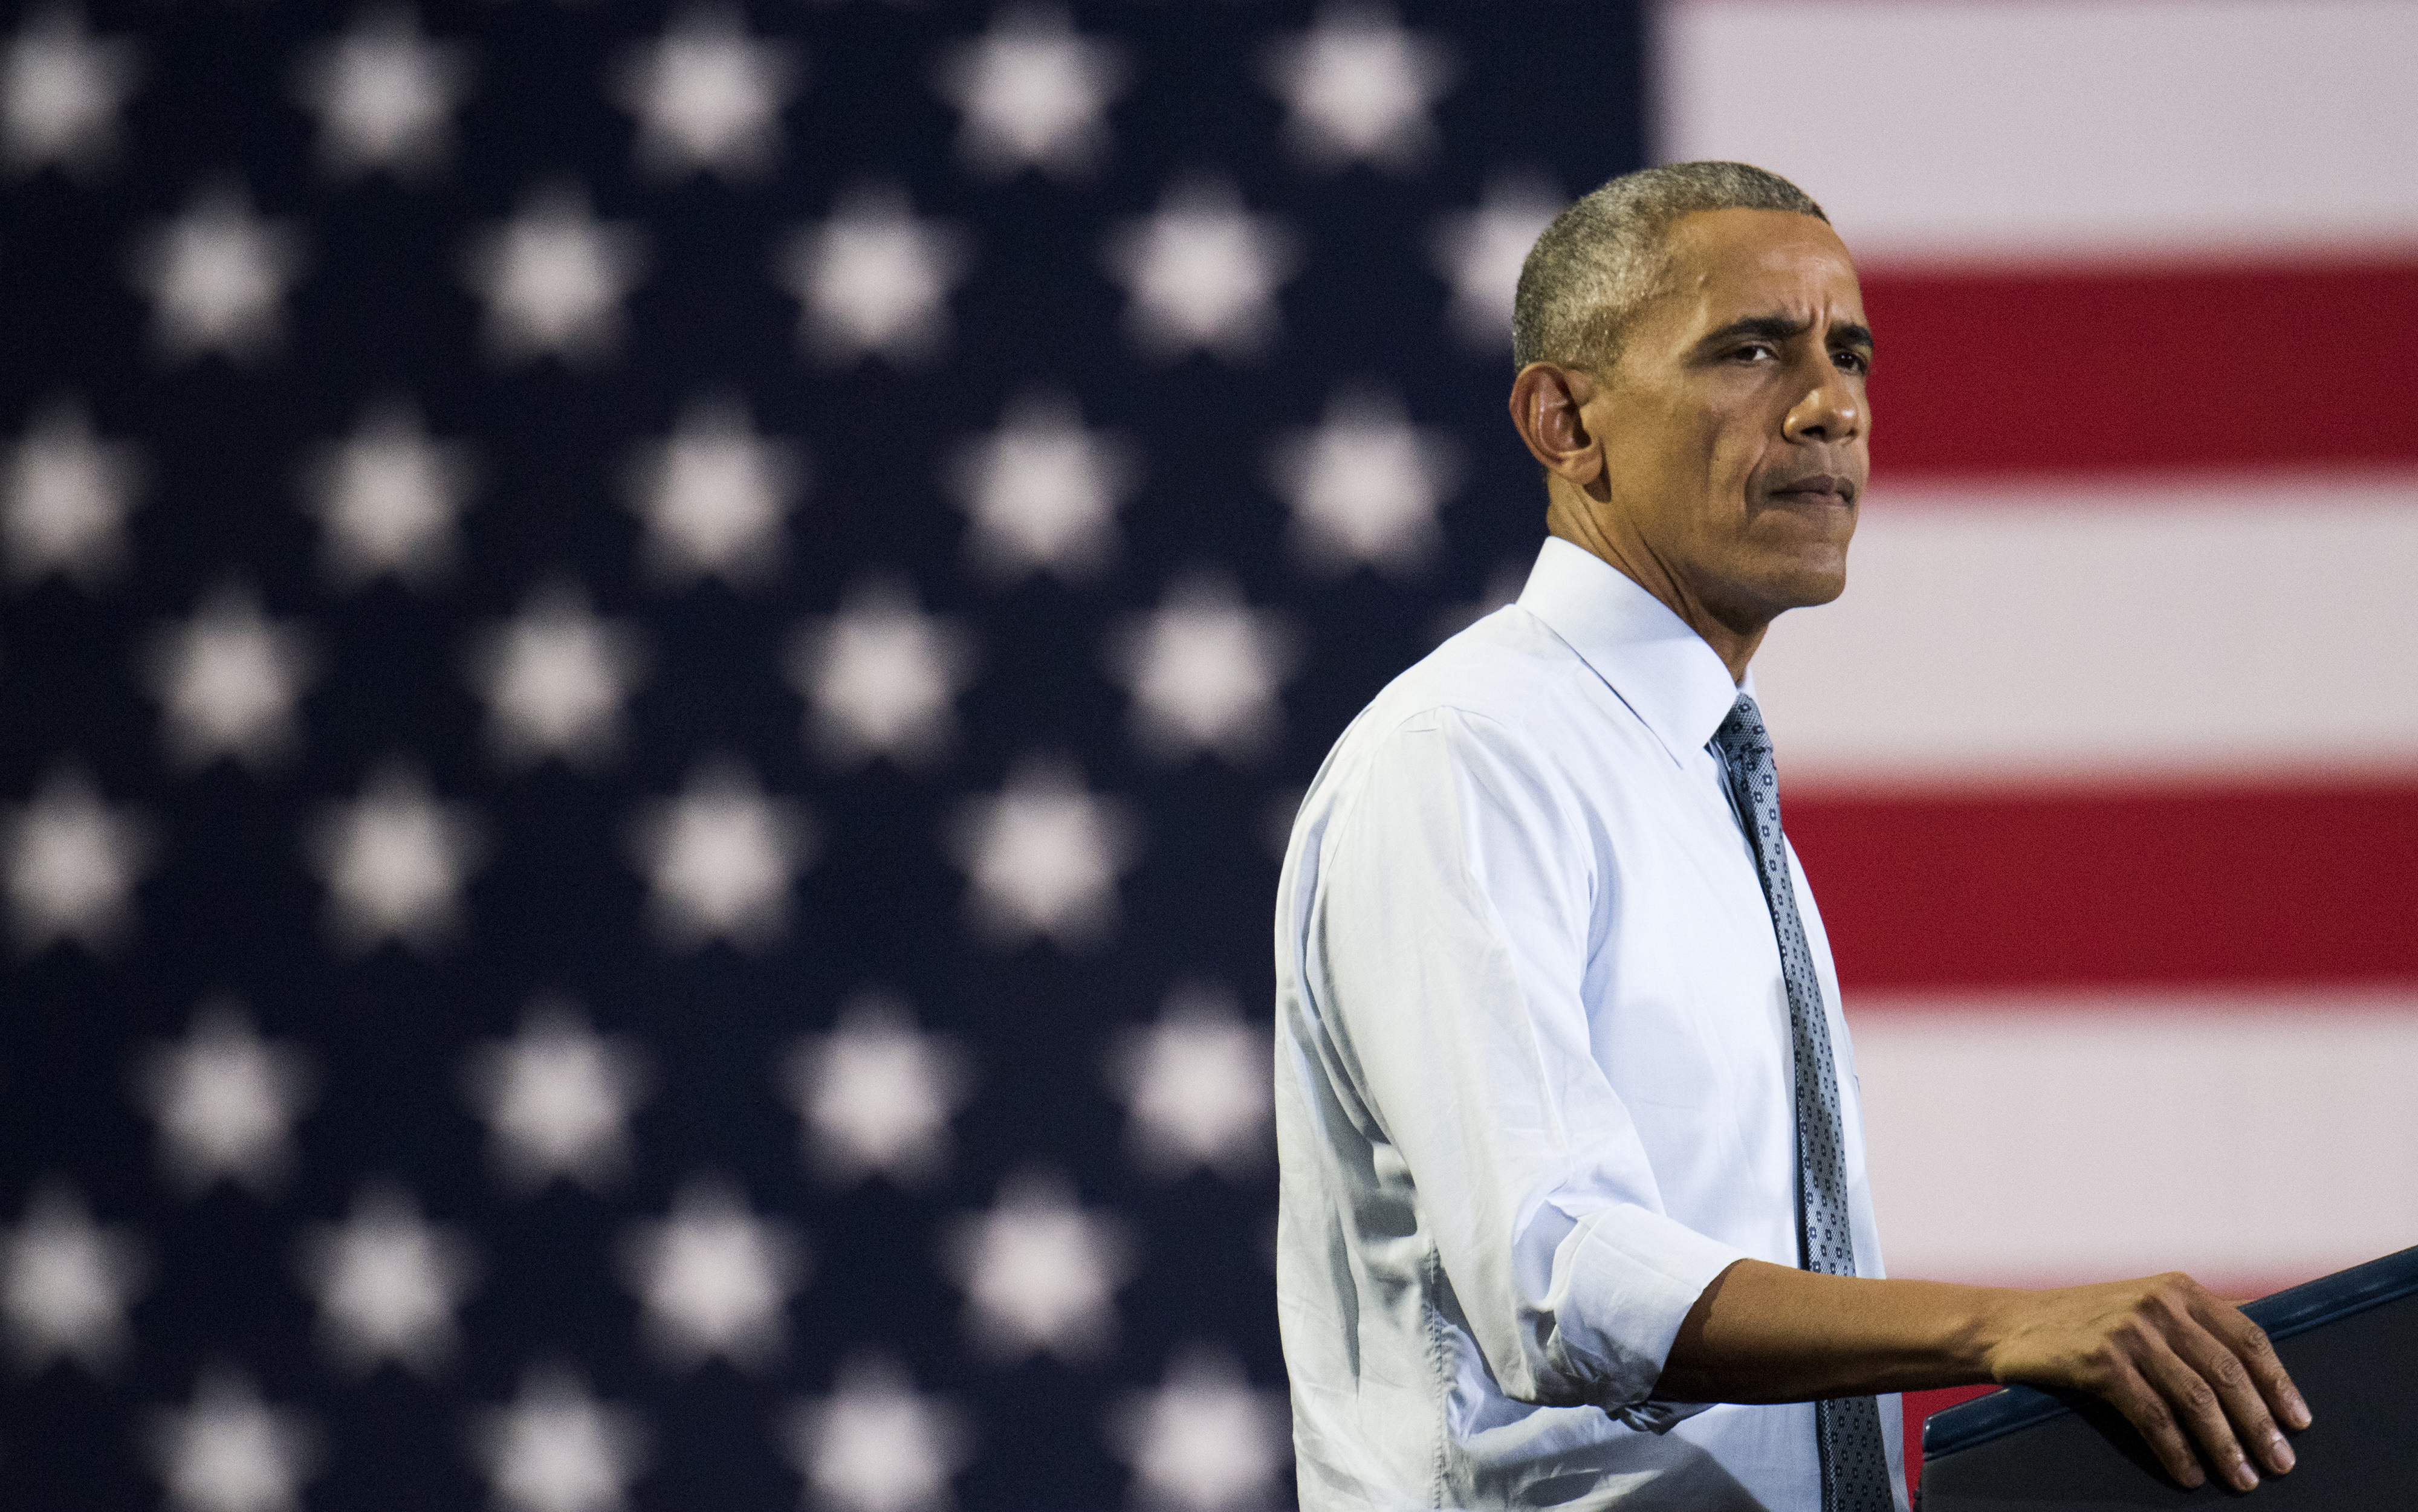 COLUMBUS, OH - NOVEMBER 01: President Barack Obama speaks during a campaign event for Hillary Clinton at Capital University on November 1, 2016 in Columbus, Ohio. President Obama was stressing to the crowd the importance to vote with the presidential race so close, between Clinton and Trump, only one week before election day.   Ty Wright/Getty Images/AFP